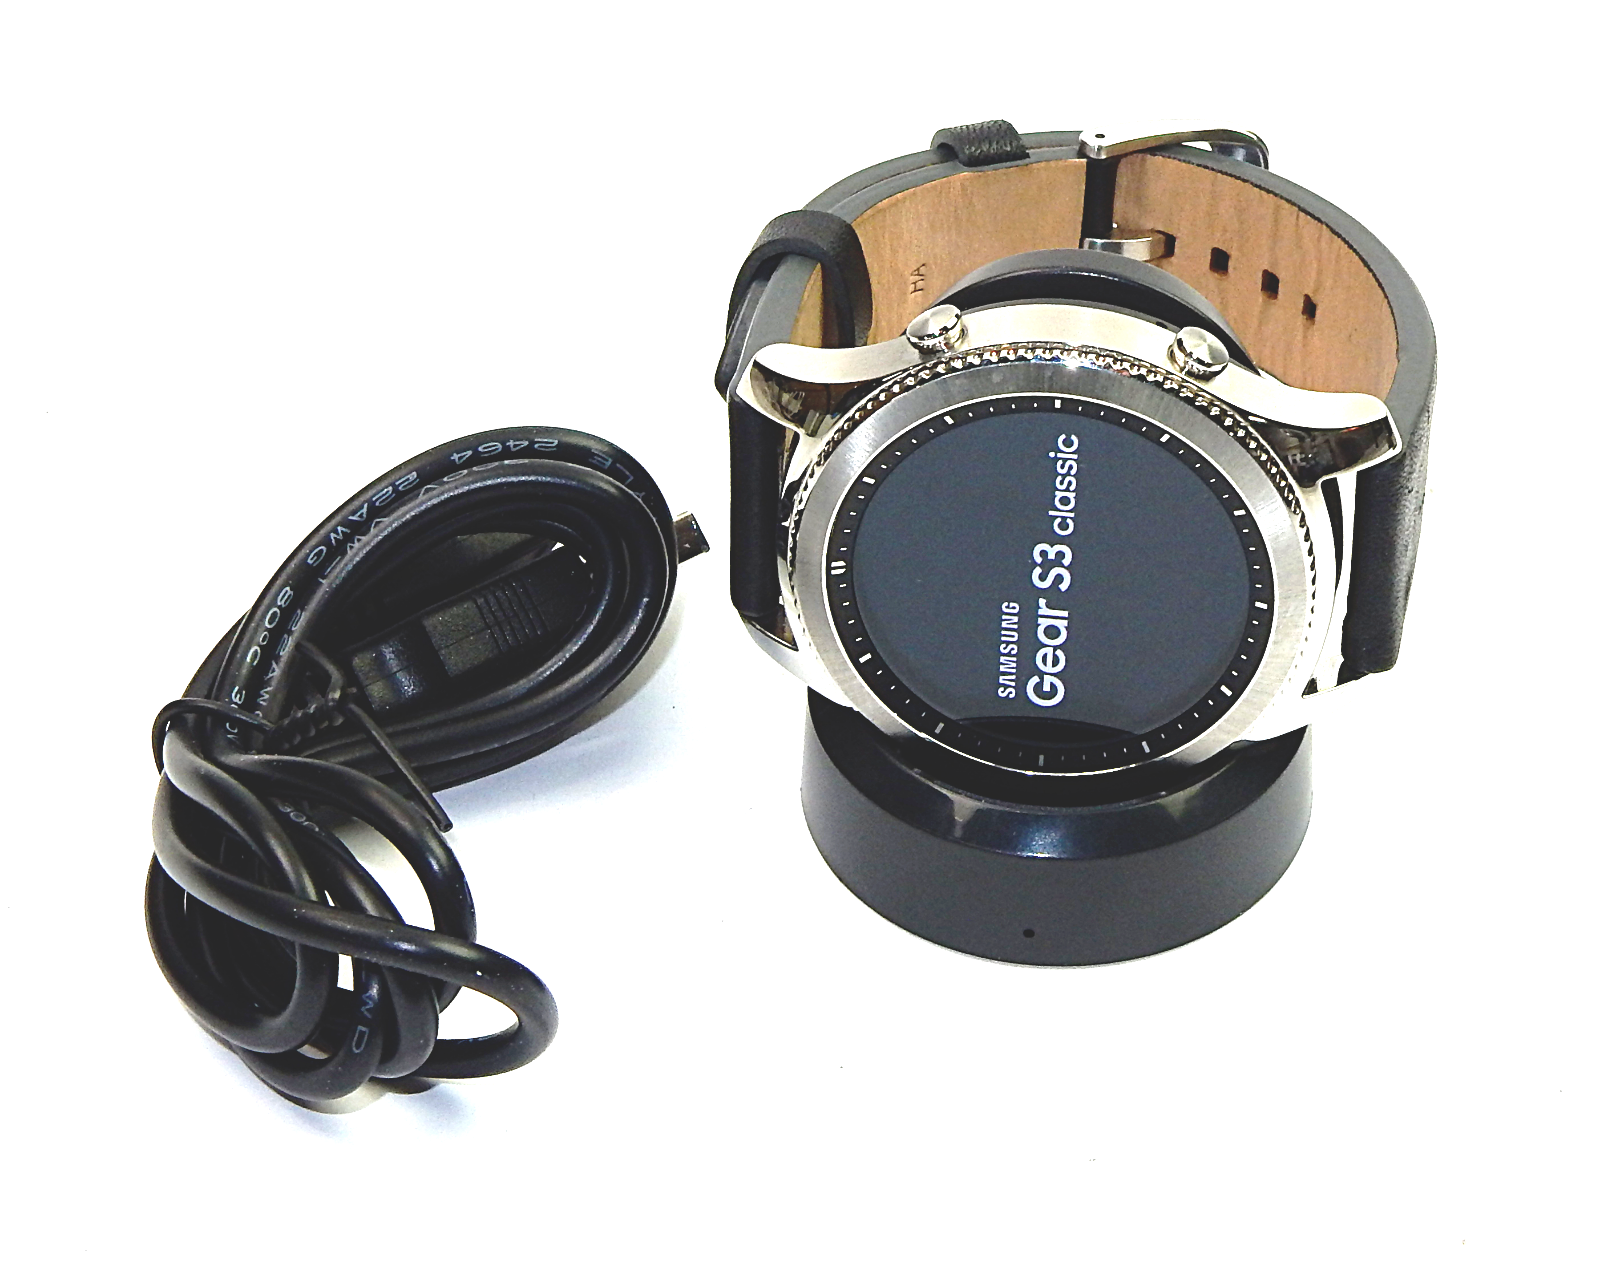 Samsung gear s2 classic review